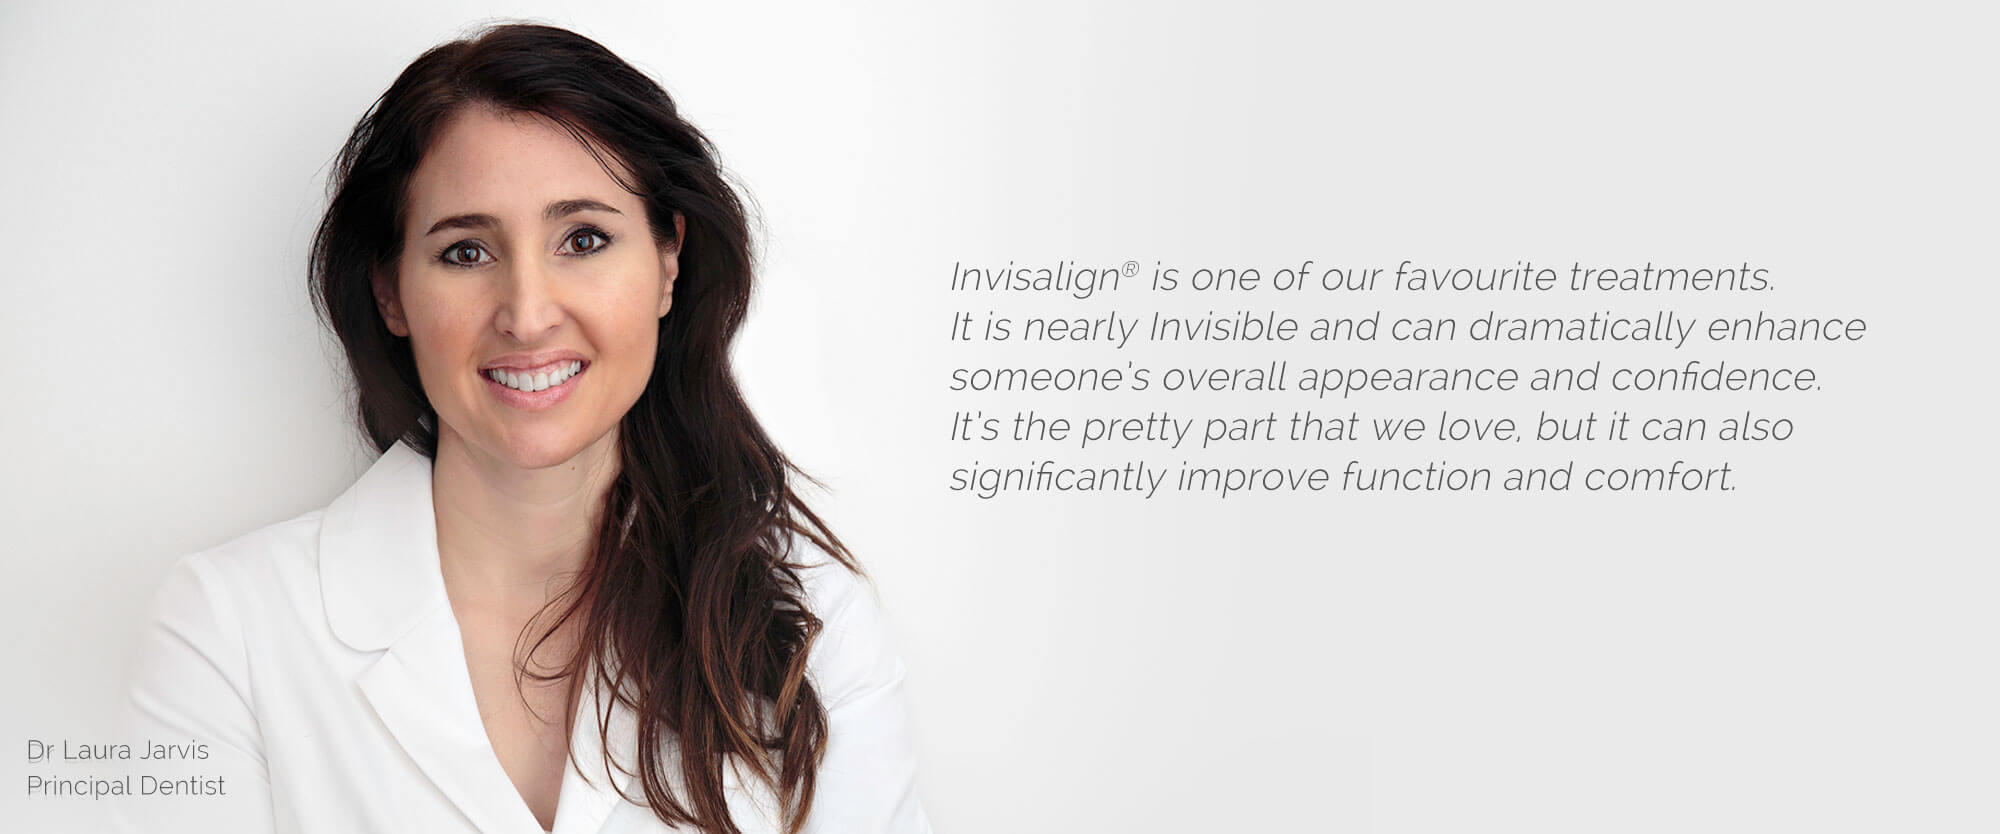 Dr Laura Jarvis Invisalign